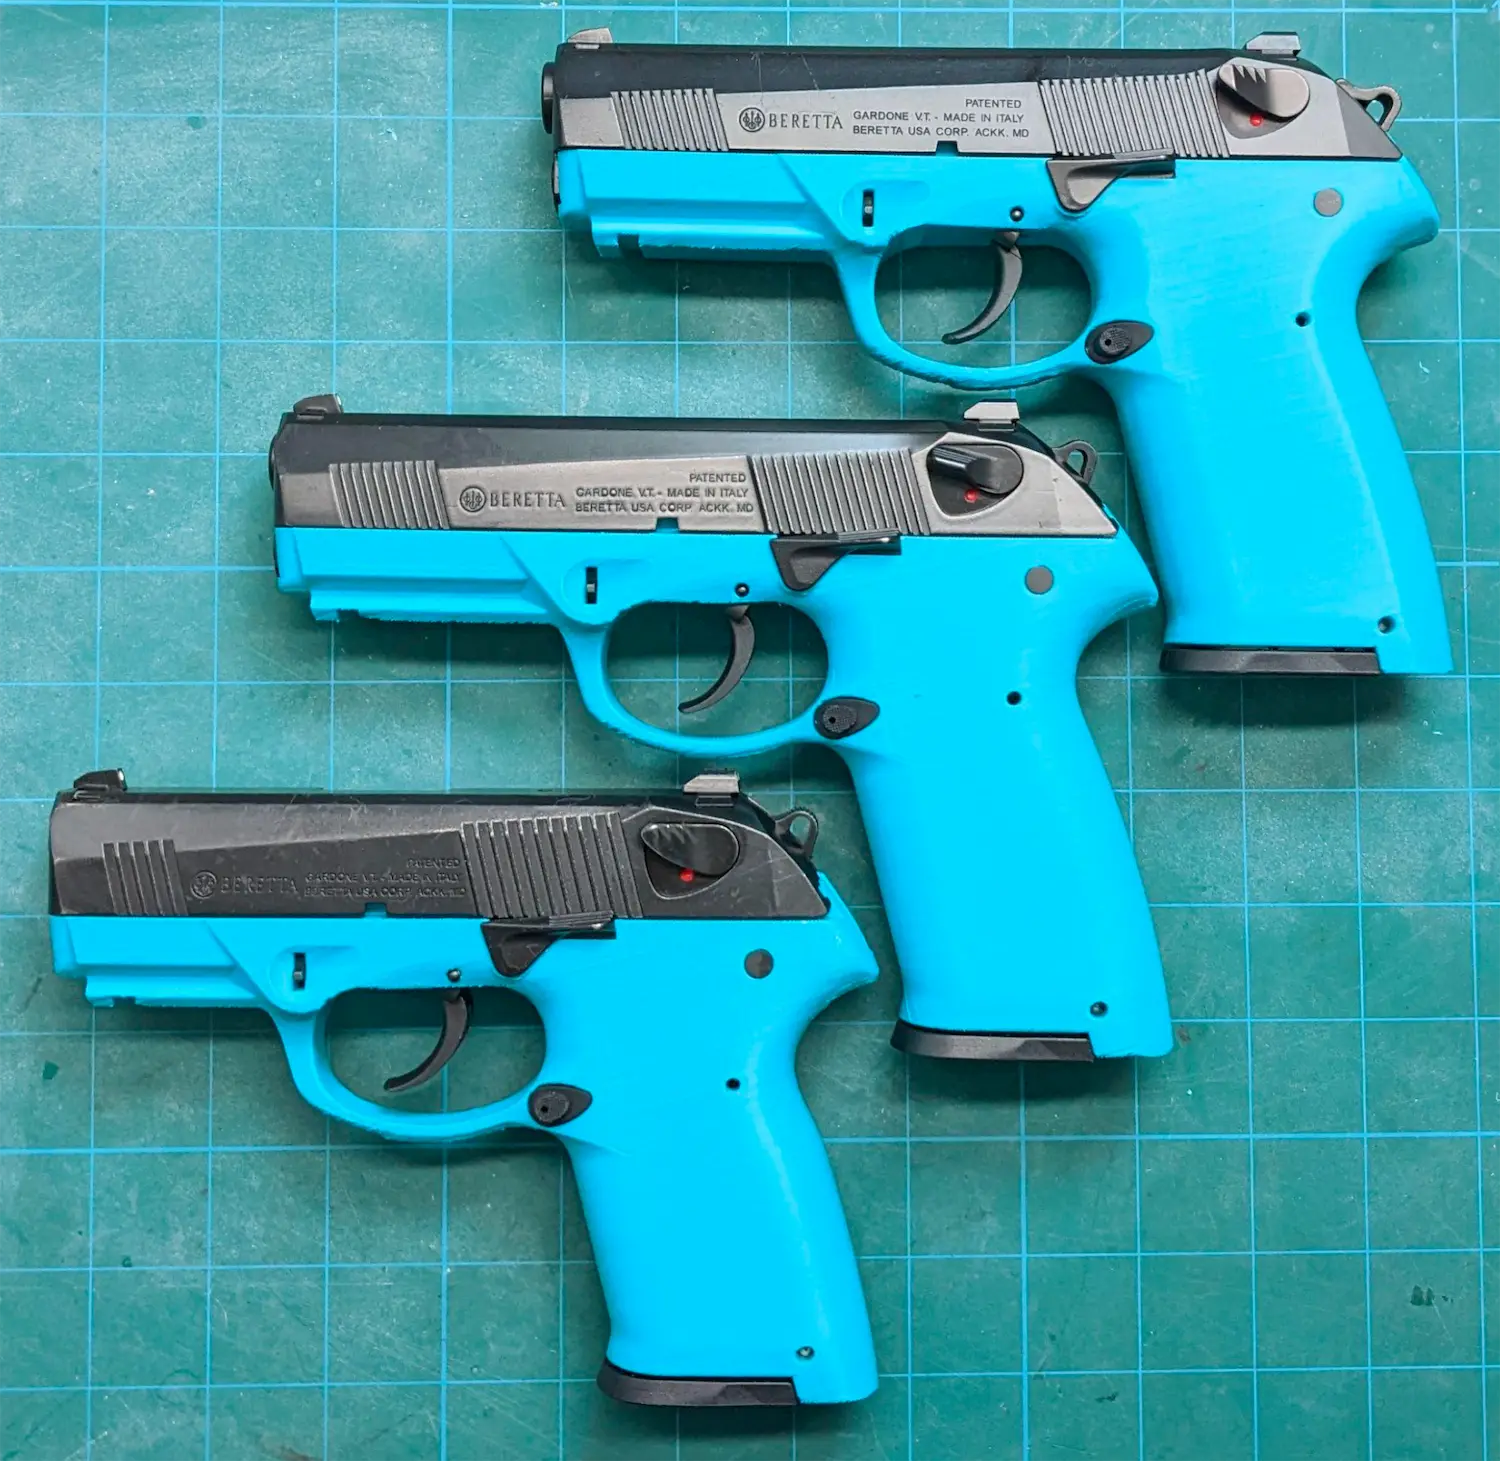 ppx4 storm variants printed